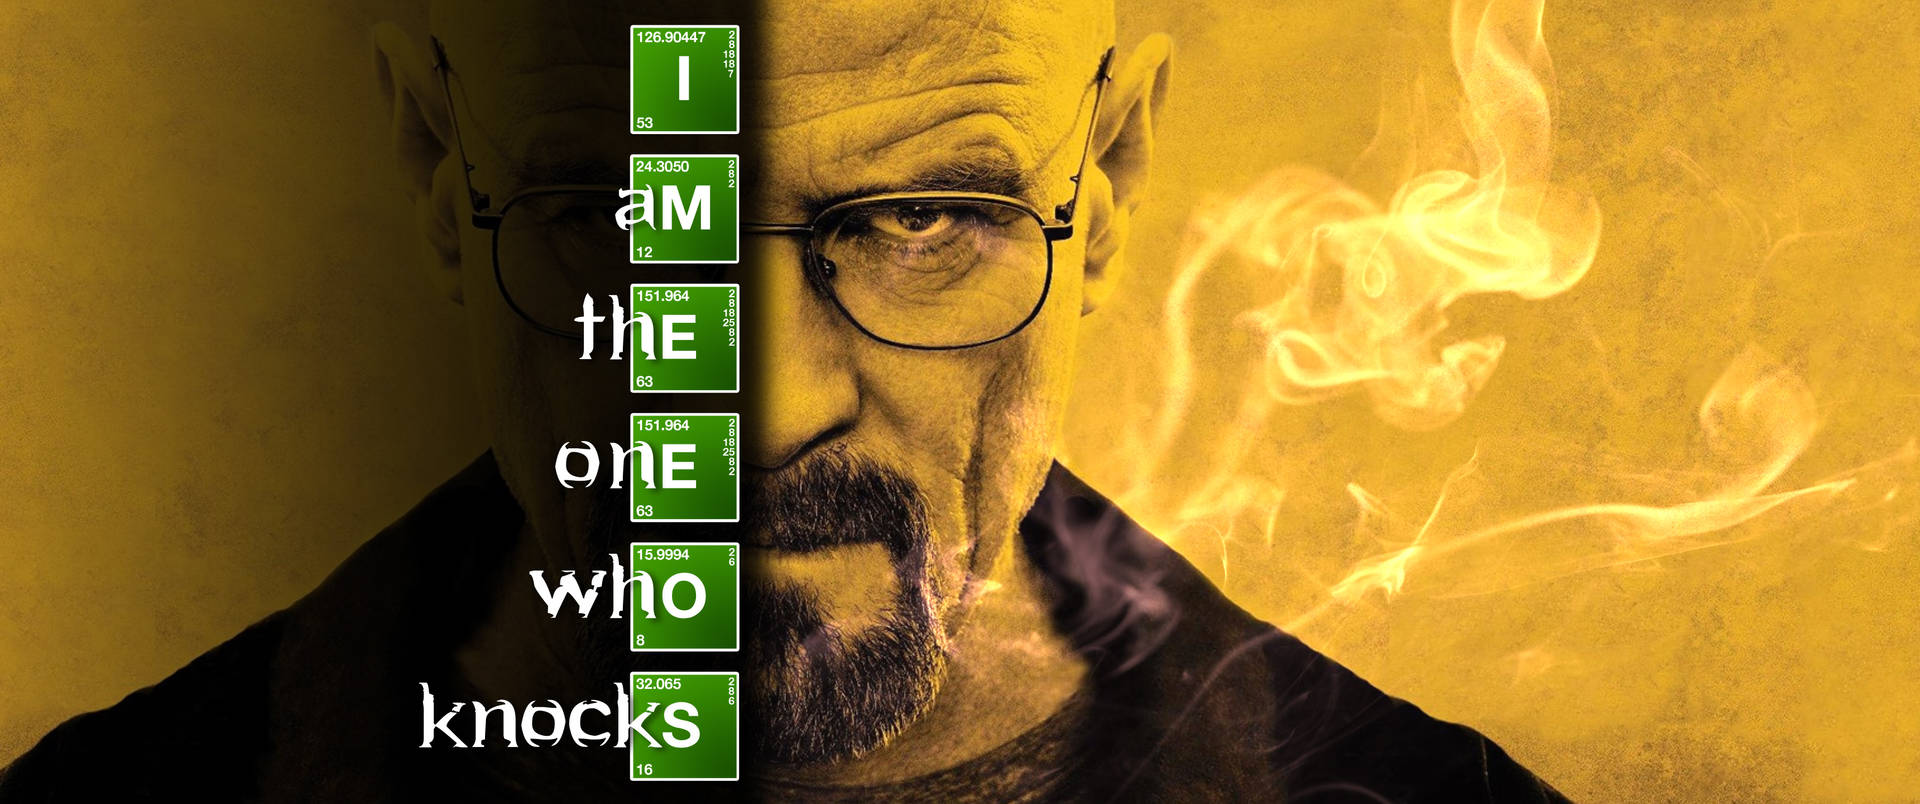 Breaking Bad 3440X1440 Wallpaper and Background Image